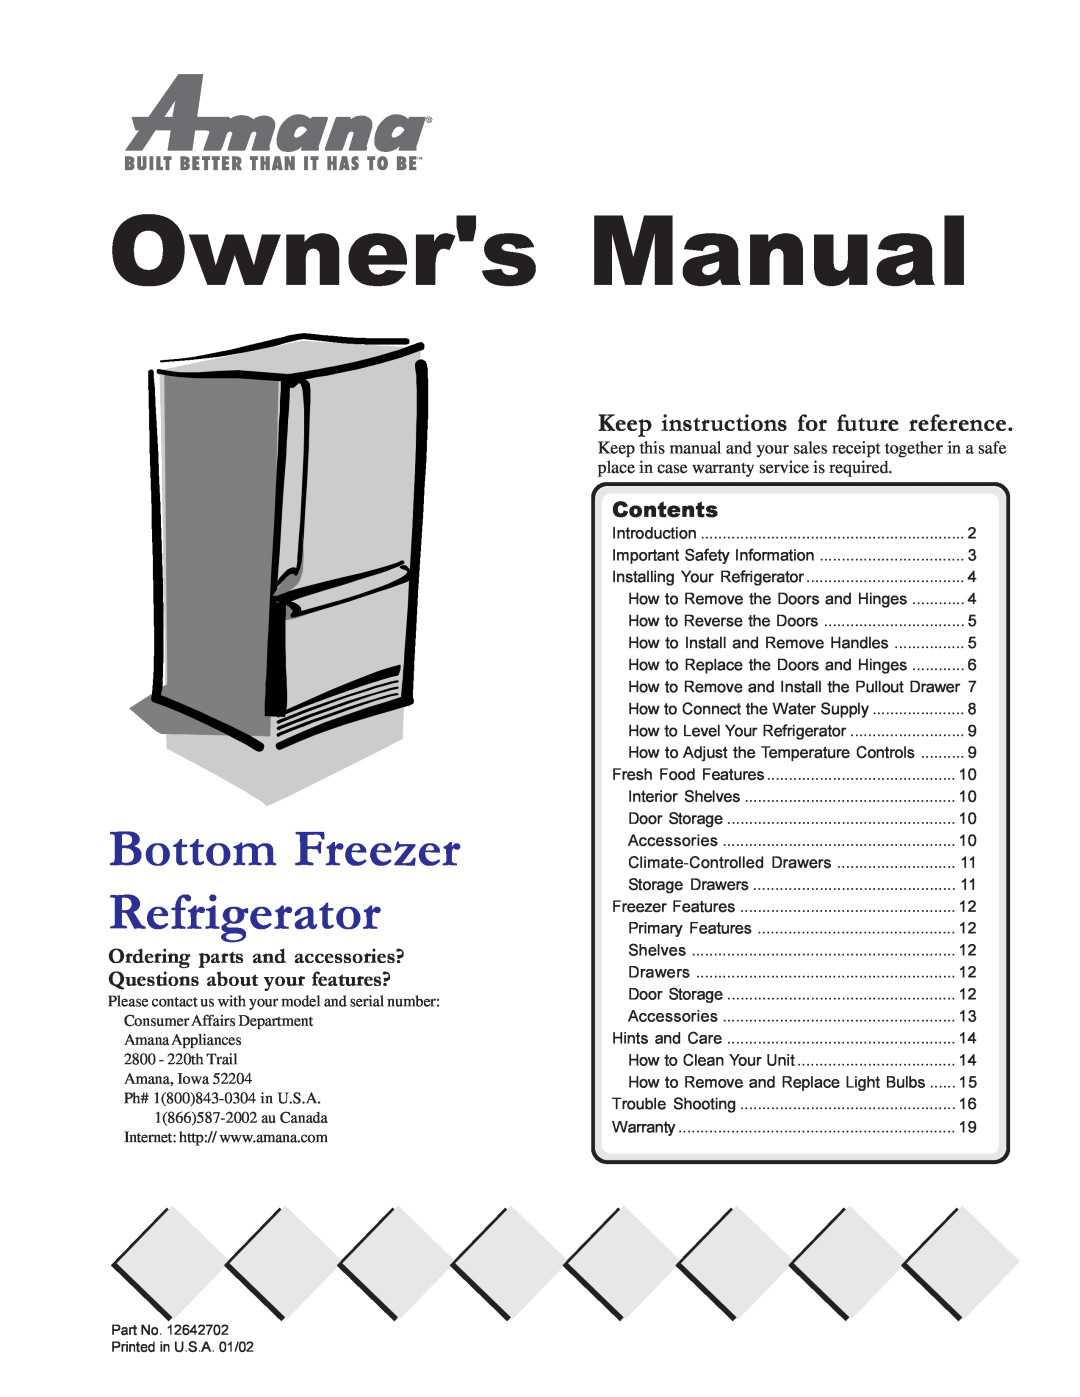 Amana W10175445A owner manual Keep instructions for future reference, Bottom Freezer Refrigerator, Contents 